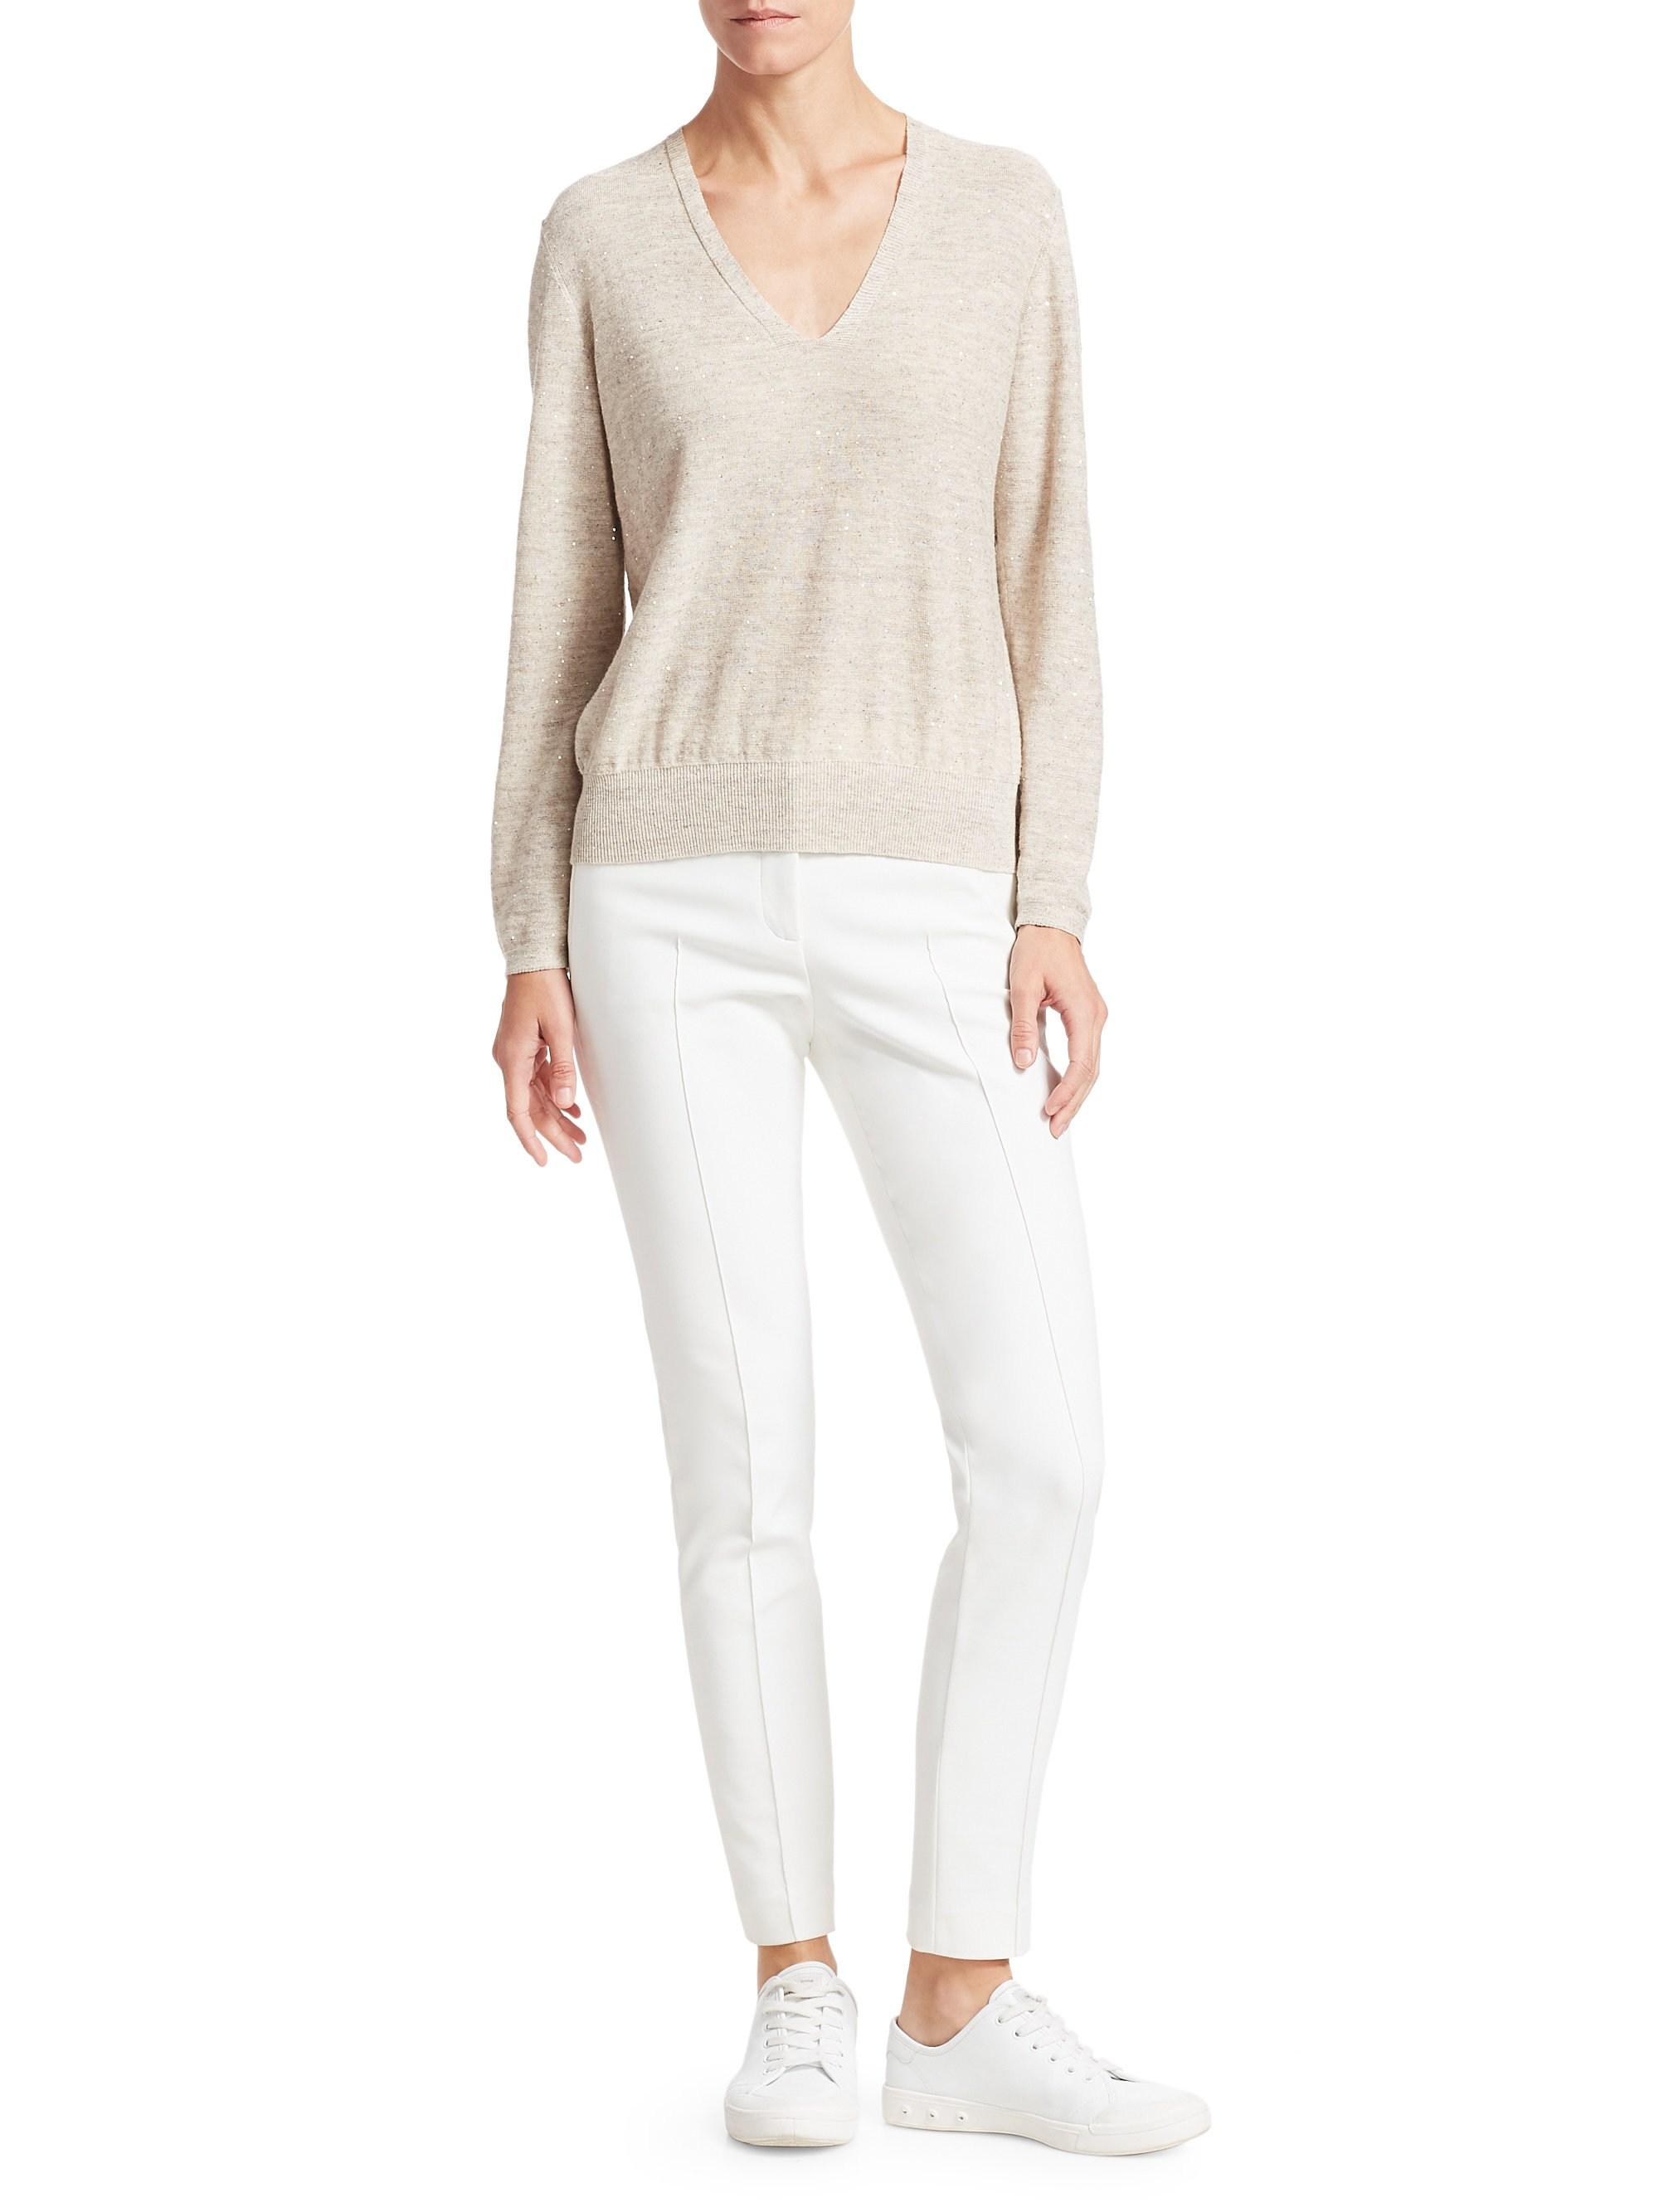 Akris Sequin V-neck Sweater in Natural - Lyst